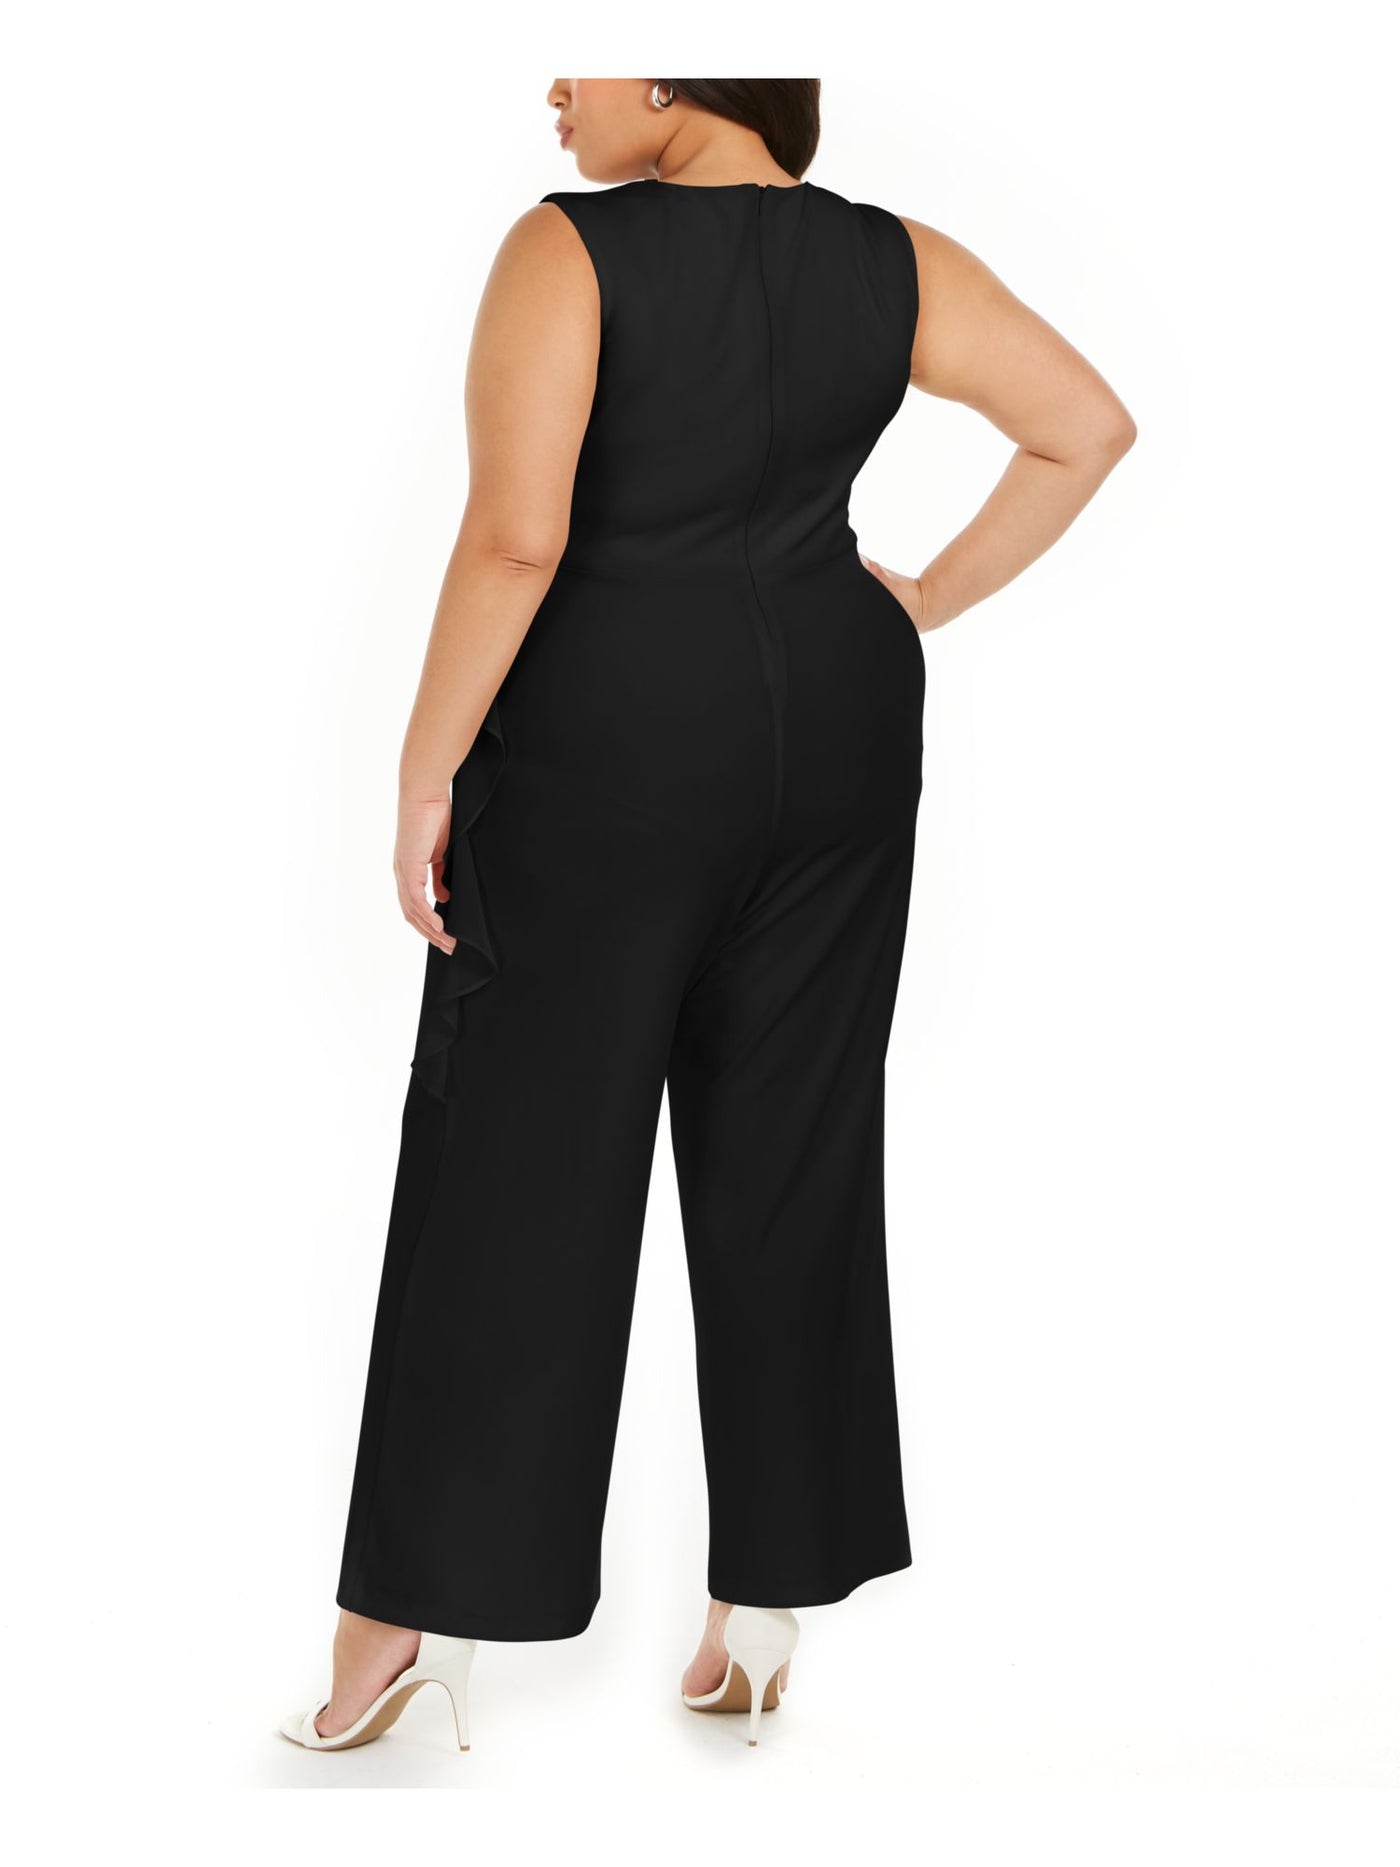 CONNECTED APPAREL Womens Ruffled Zippered Sheer Sleeveless V Neck Cocktail Wide Leg Jumpsuit